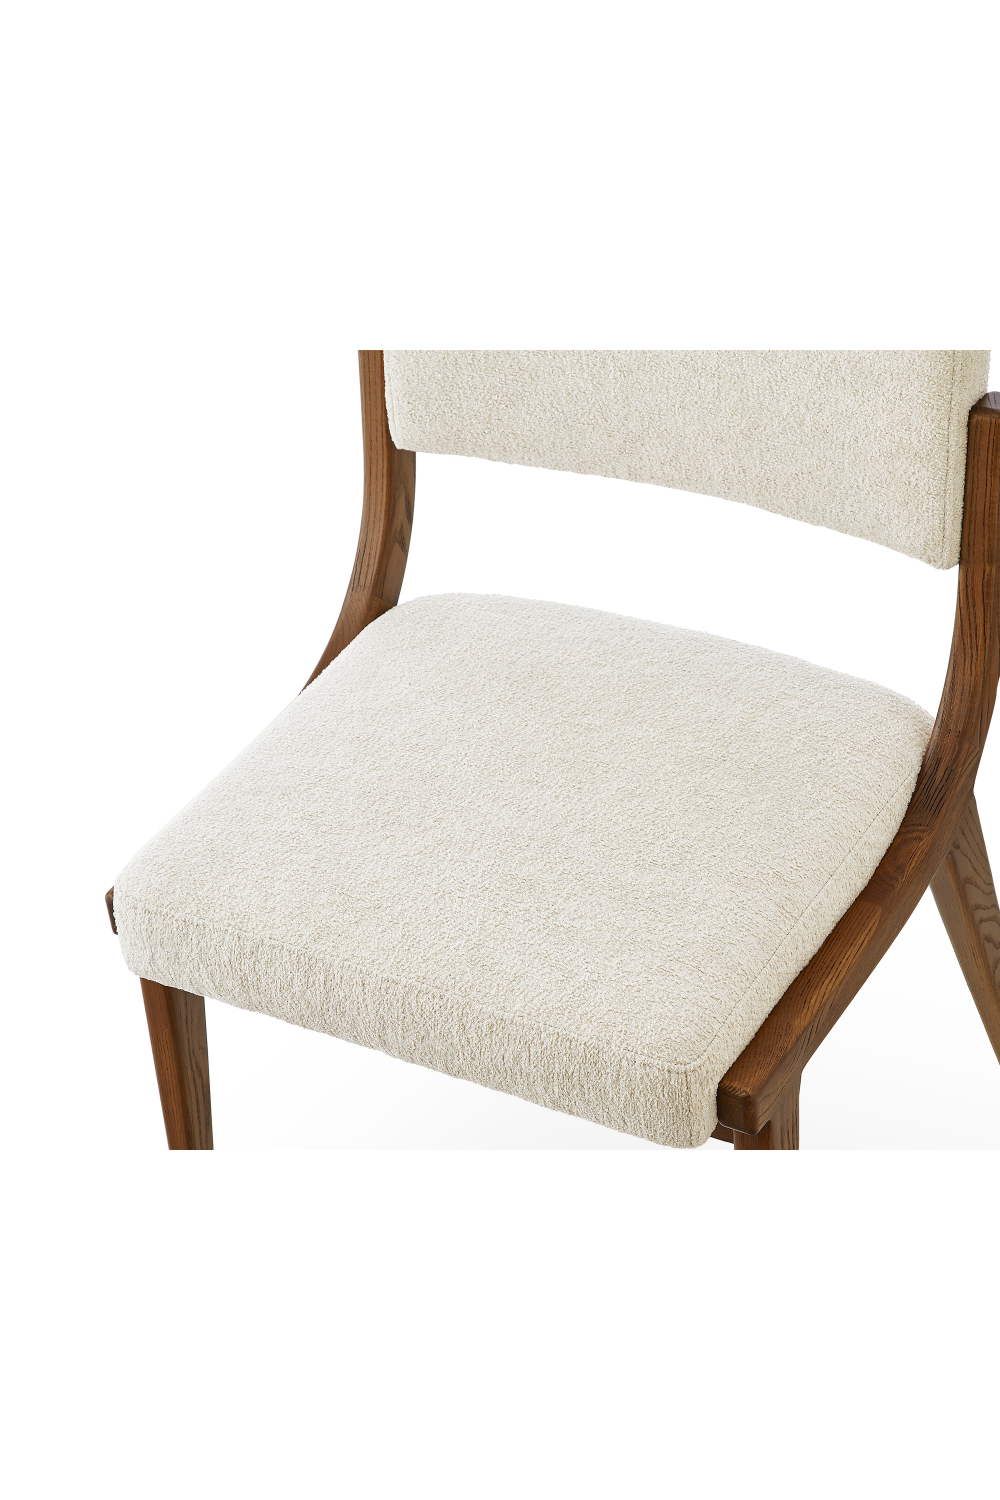 Wood Framed Dining Chair | Liang & Eimil Miami | Oroa.com